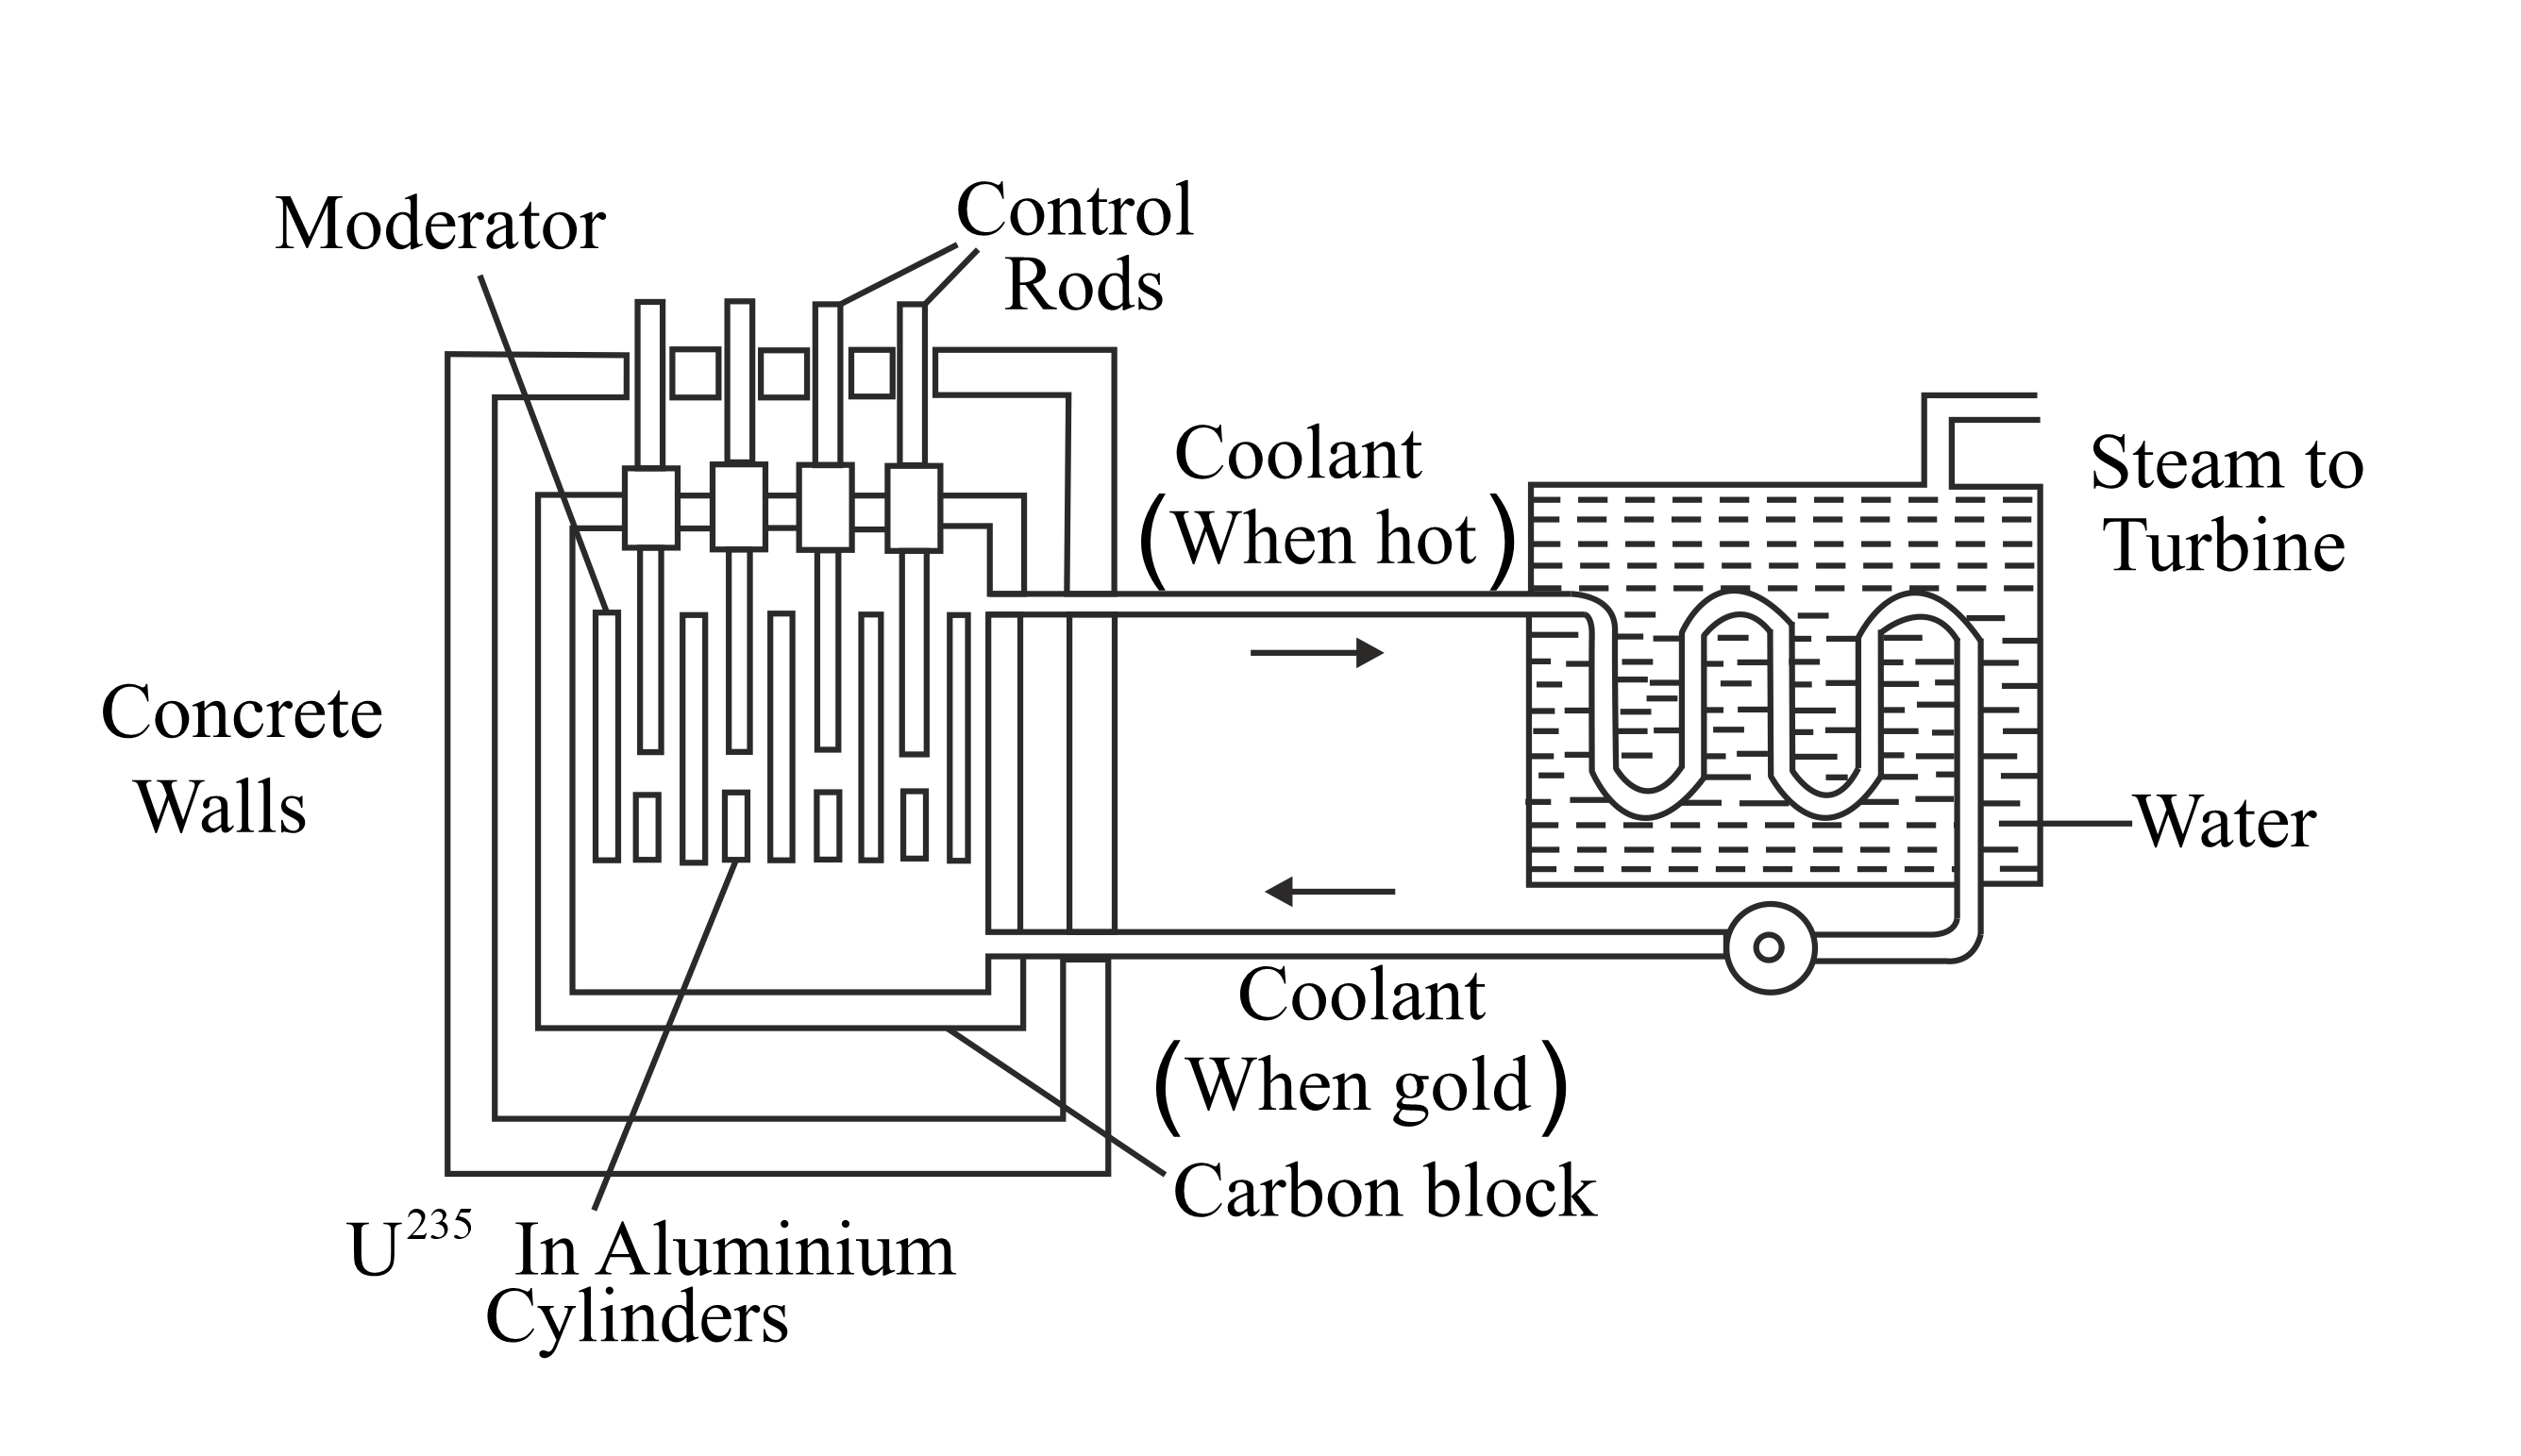 nuclear power plant diagram labeled